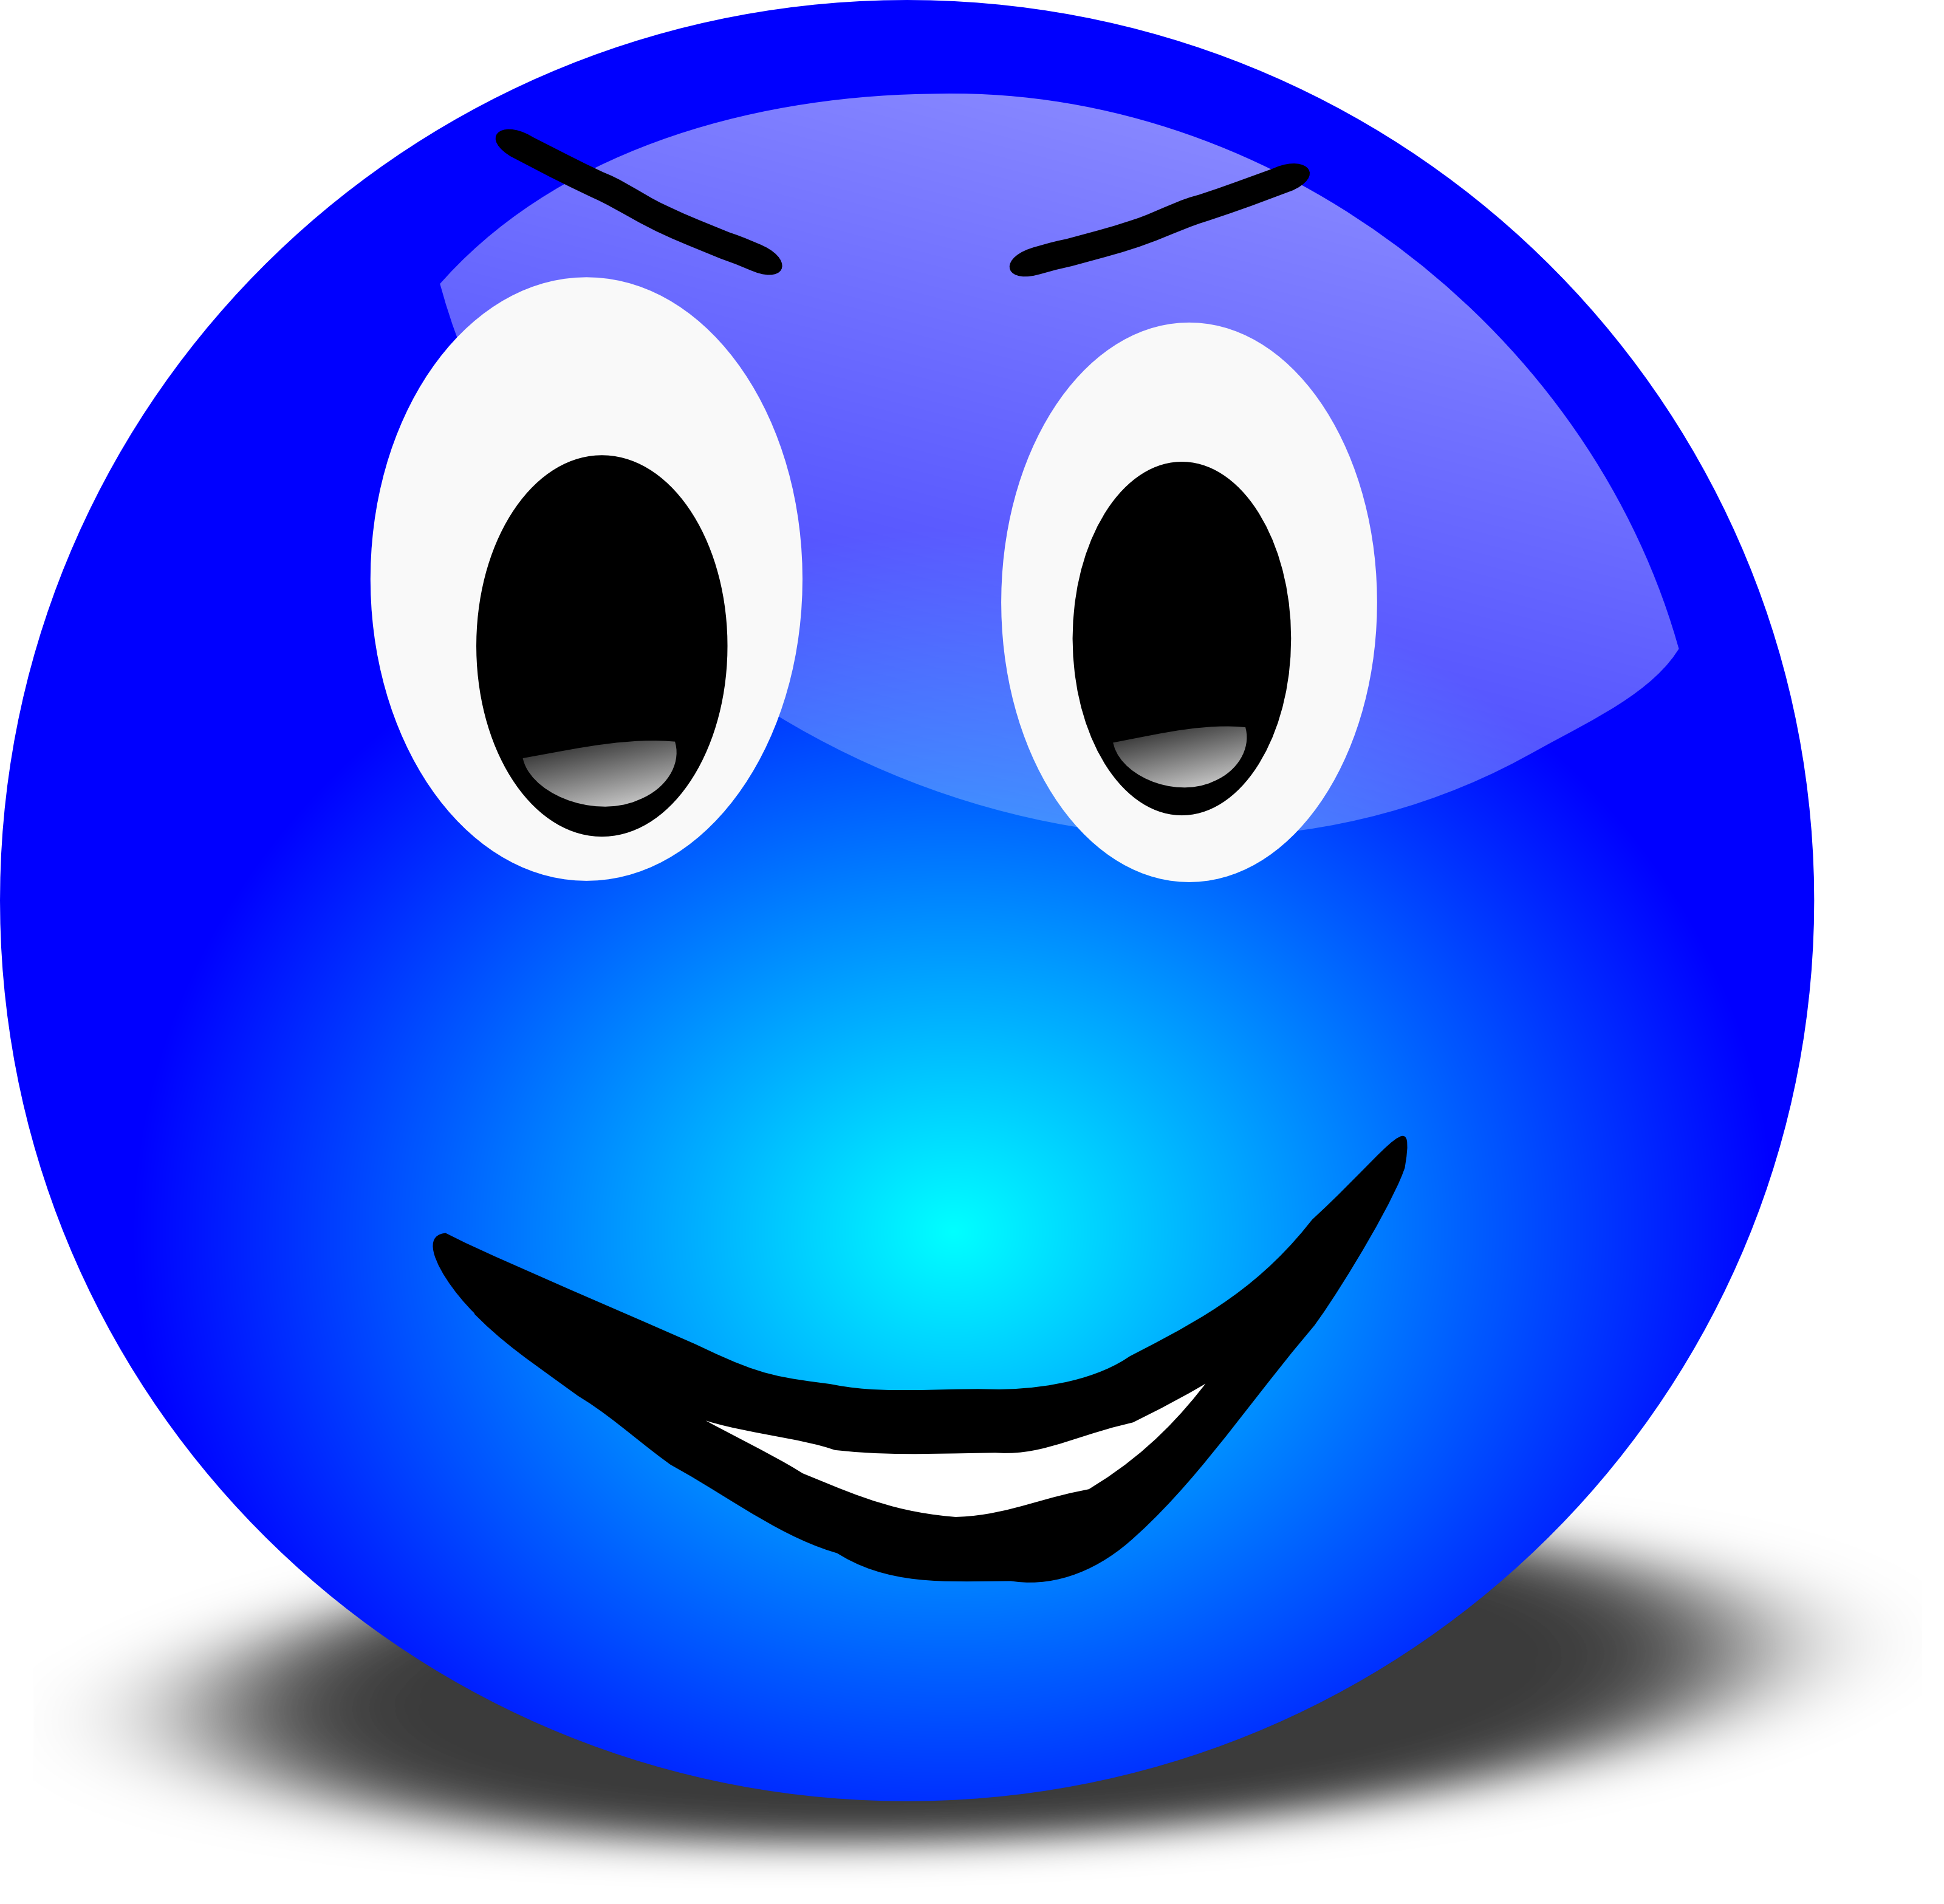 Green Smiley Face Png - Free Clipart Images